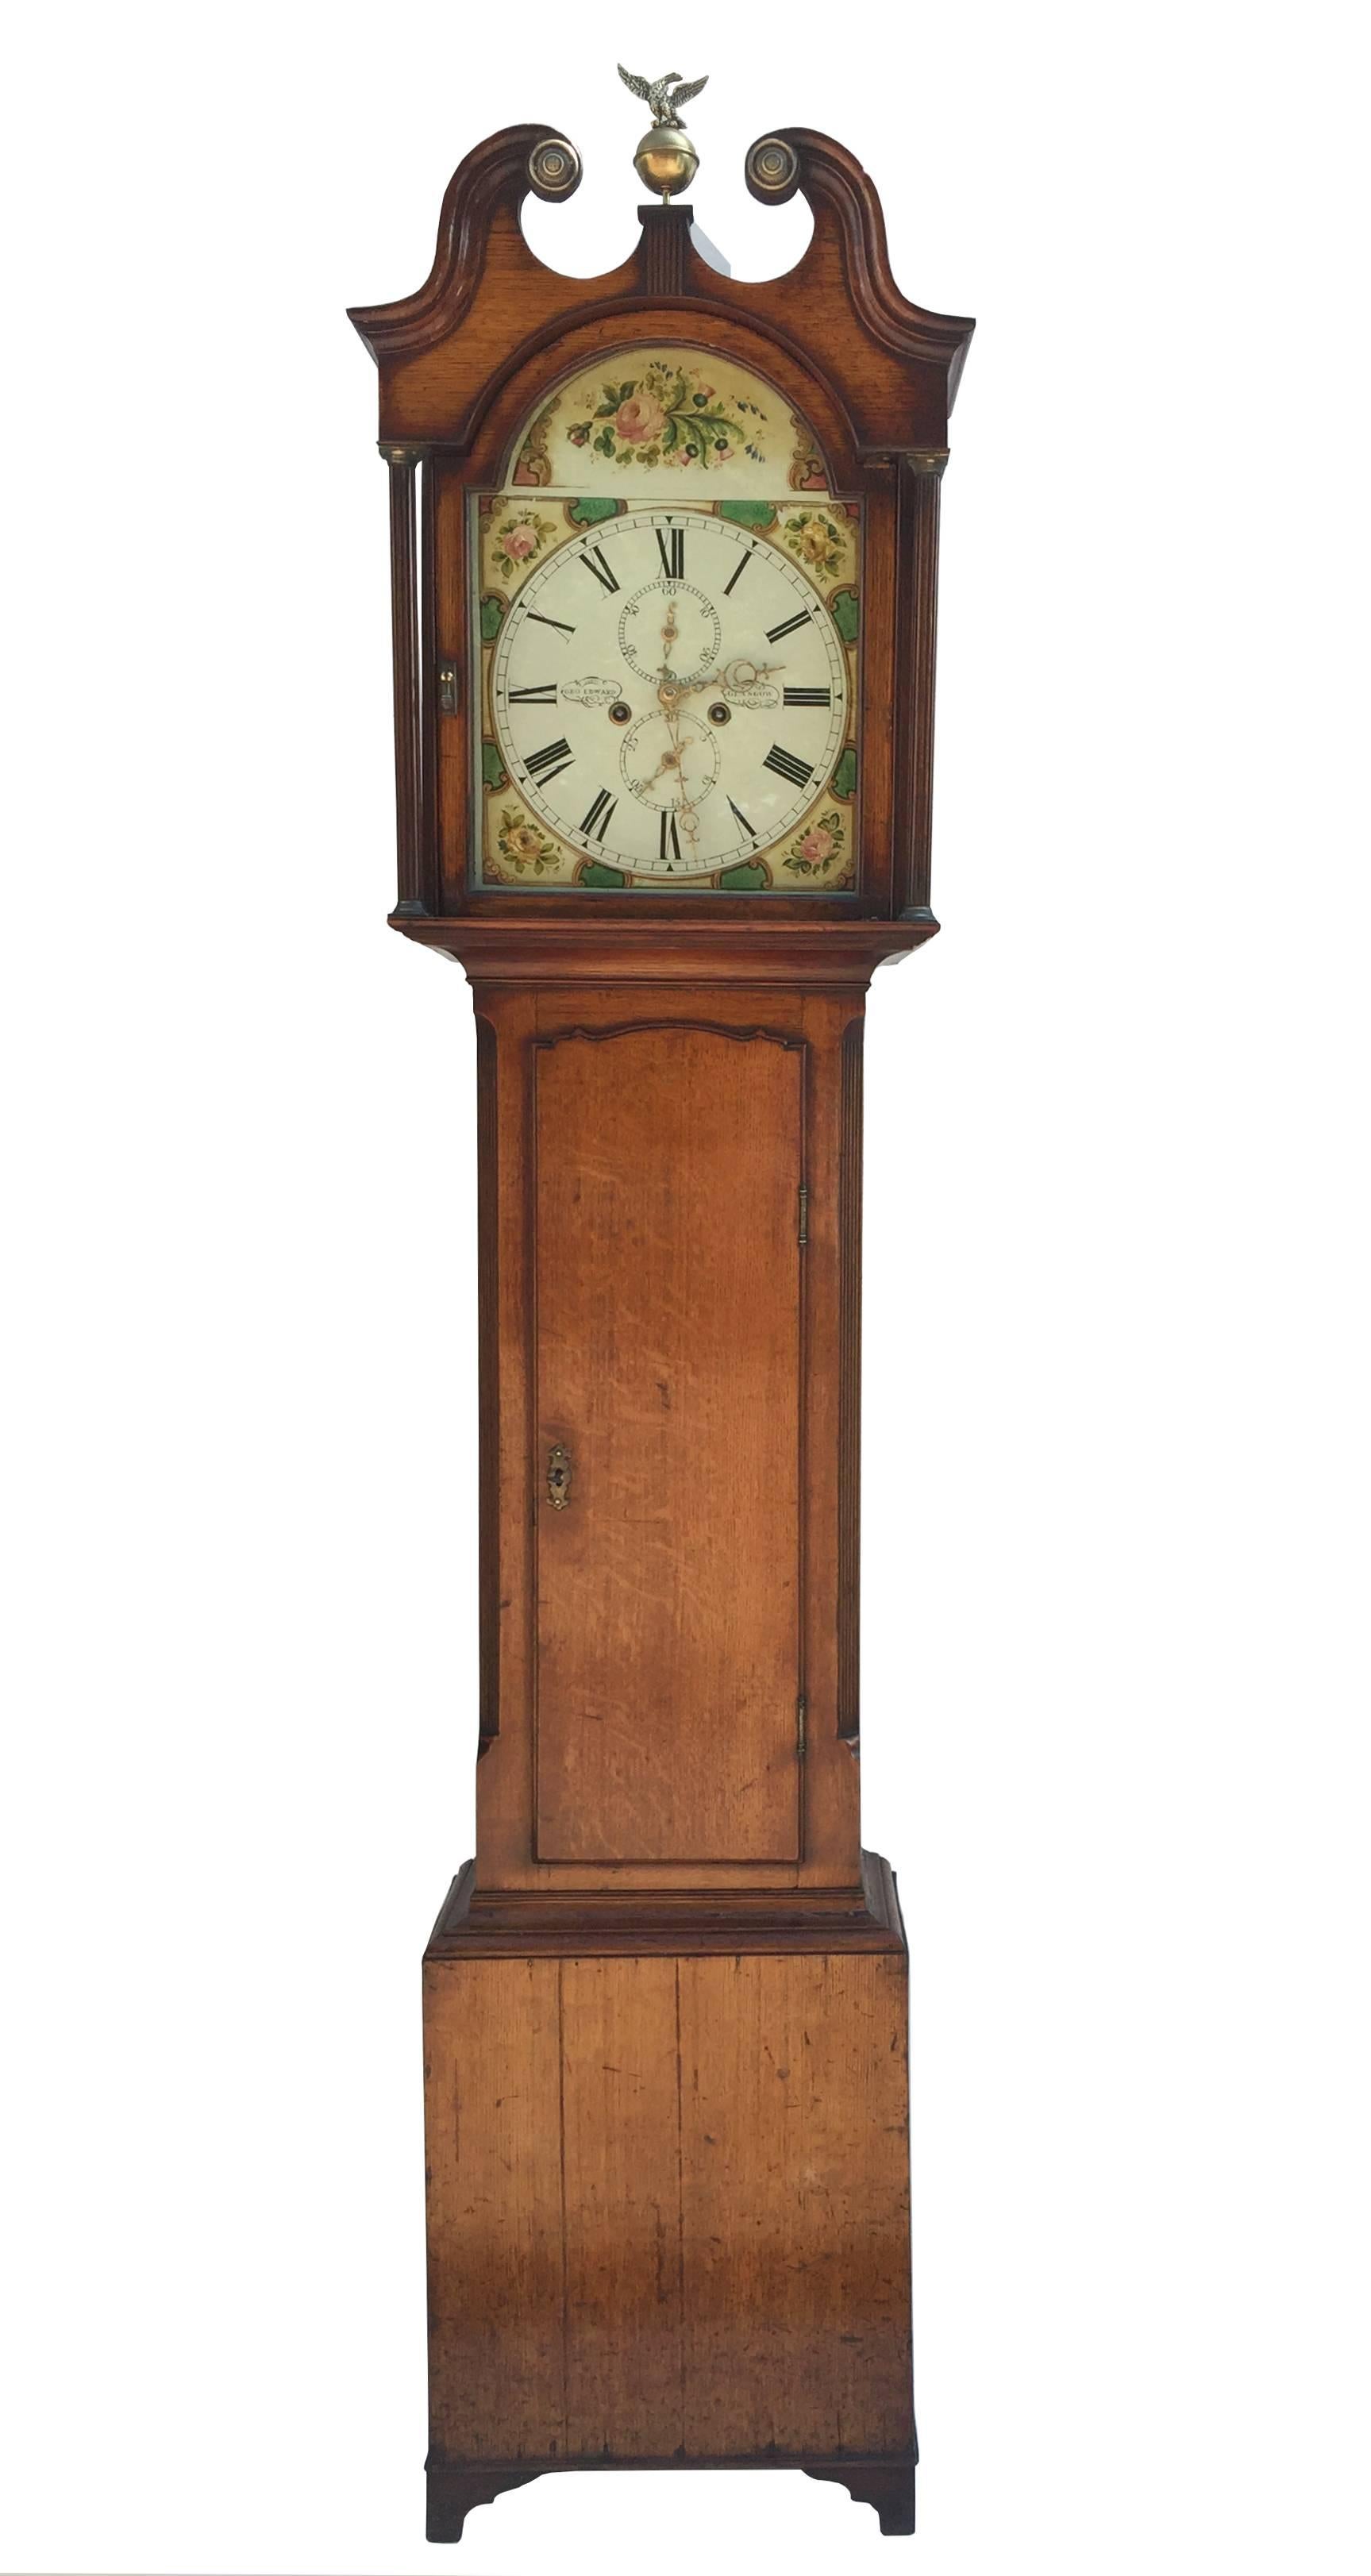 
This clock is of lovely proportions, with a swan neck hood centred with brass eagle finial. The arched dial finely painted both in the arch and in the spandrels in floral motif depicting roses. The dial with roman numerals, also with second hand